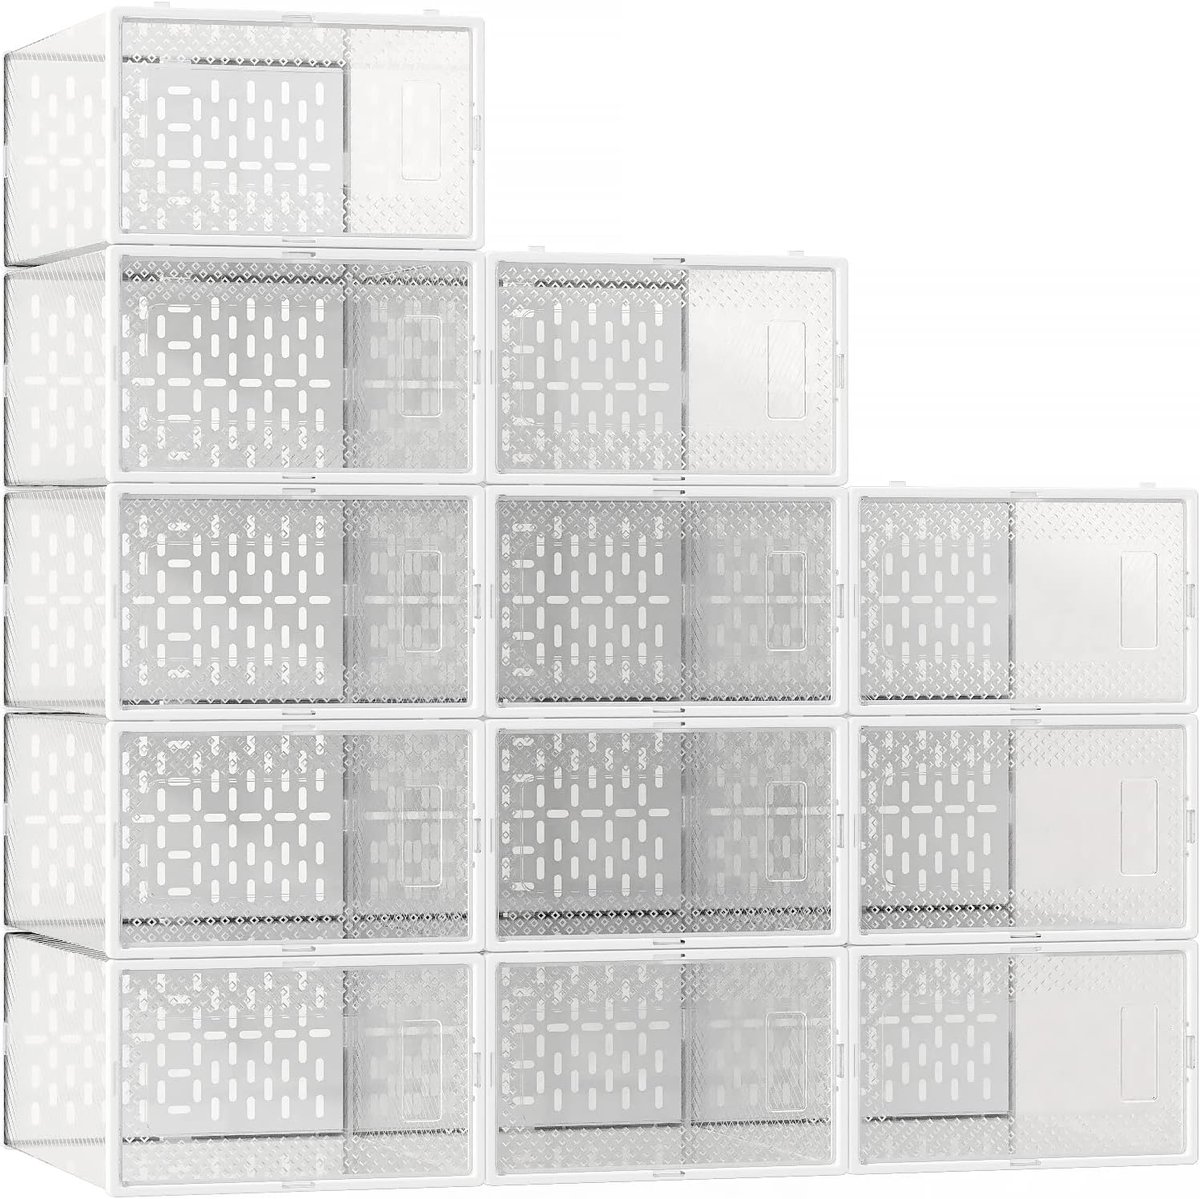 12pk of Shoe Storage Containers for $23.99, retail $50!
Use promo code; 20BO8TID
fkd.sale/?l=https://amz…

5 Drawer Chest/Drawer for $39 with coupon!
fkd.sale/?l=https://amz…